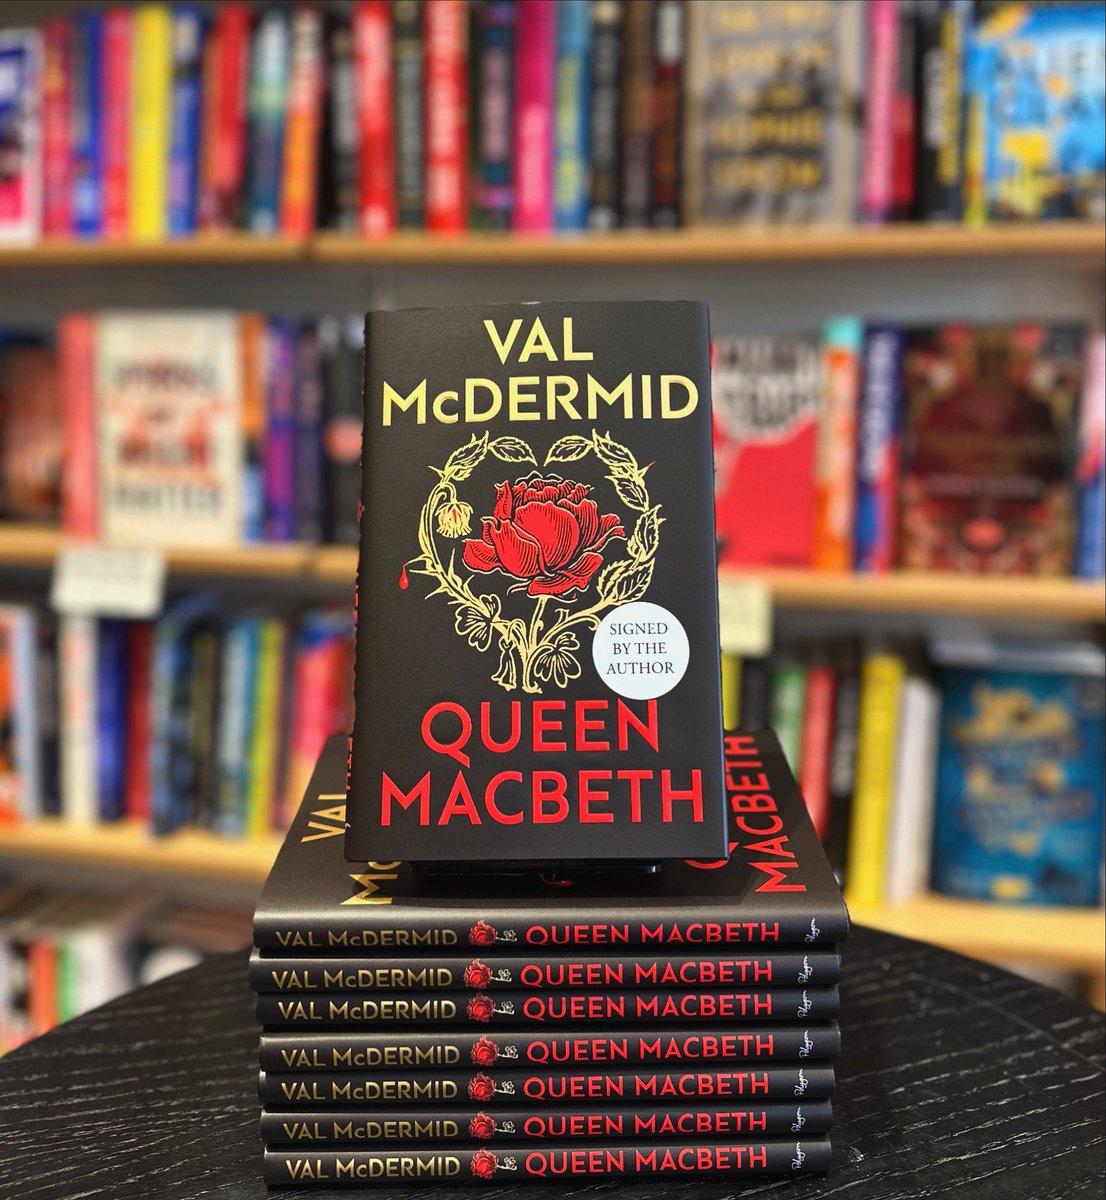 The latest novel in the incredible Darkland Tales series is here! In Queen Macbeth, Val McDermid reimagines the story of Lady Macbeth with searing feminist power. Pick up a copy in-store now! 🥀🗡️ #waterstones #darklandtales